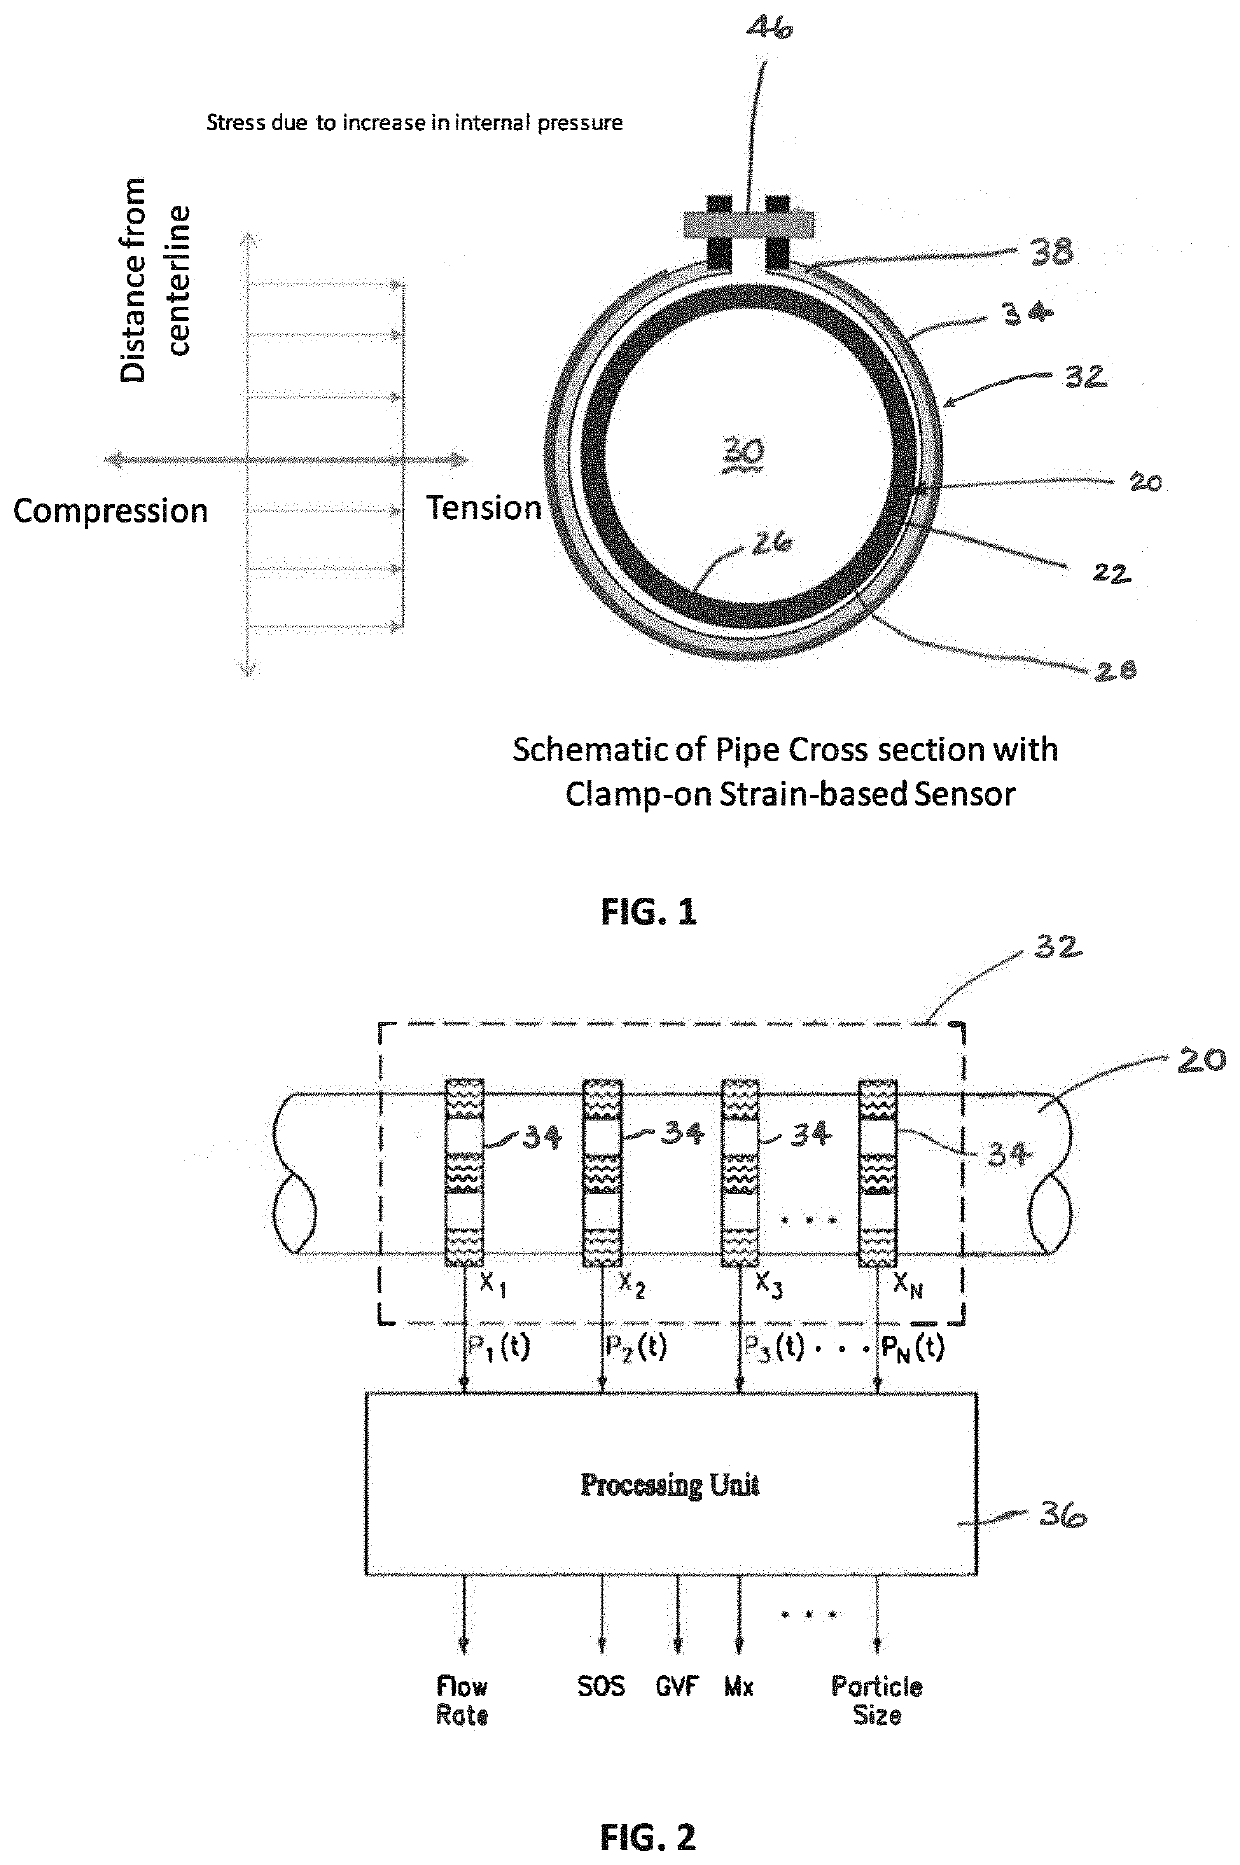 Apparatus and method for decreasing vibrational sensitivity of strain-based measurements of fluid flow parameters for a fluid flow within a conduit